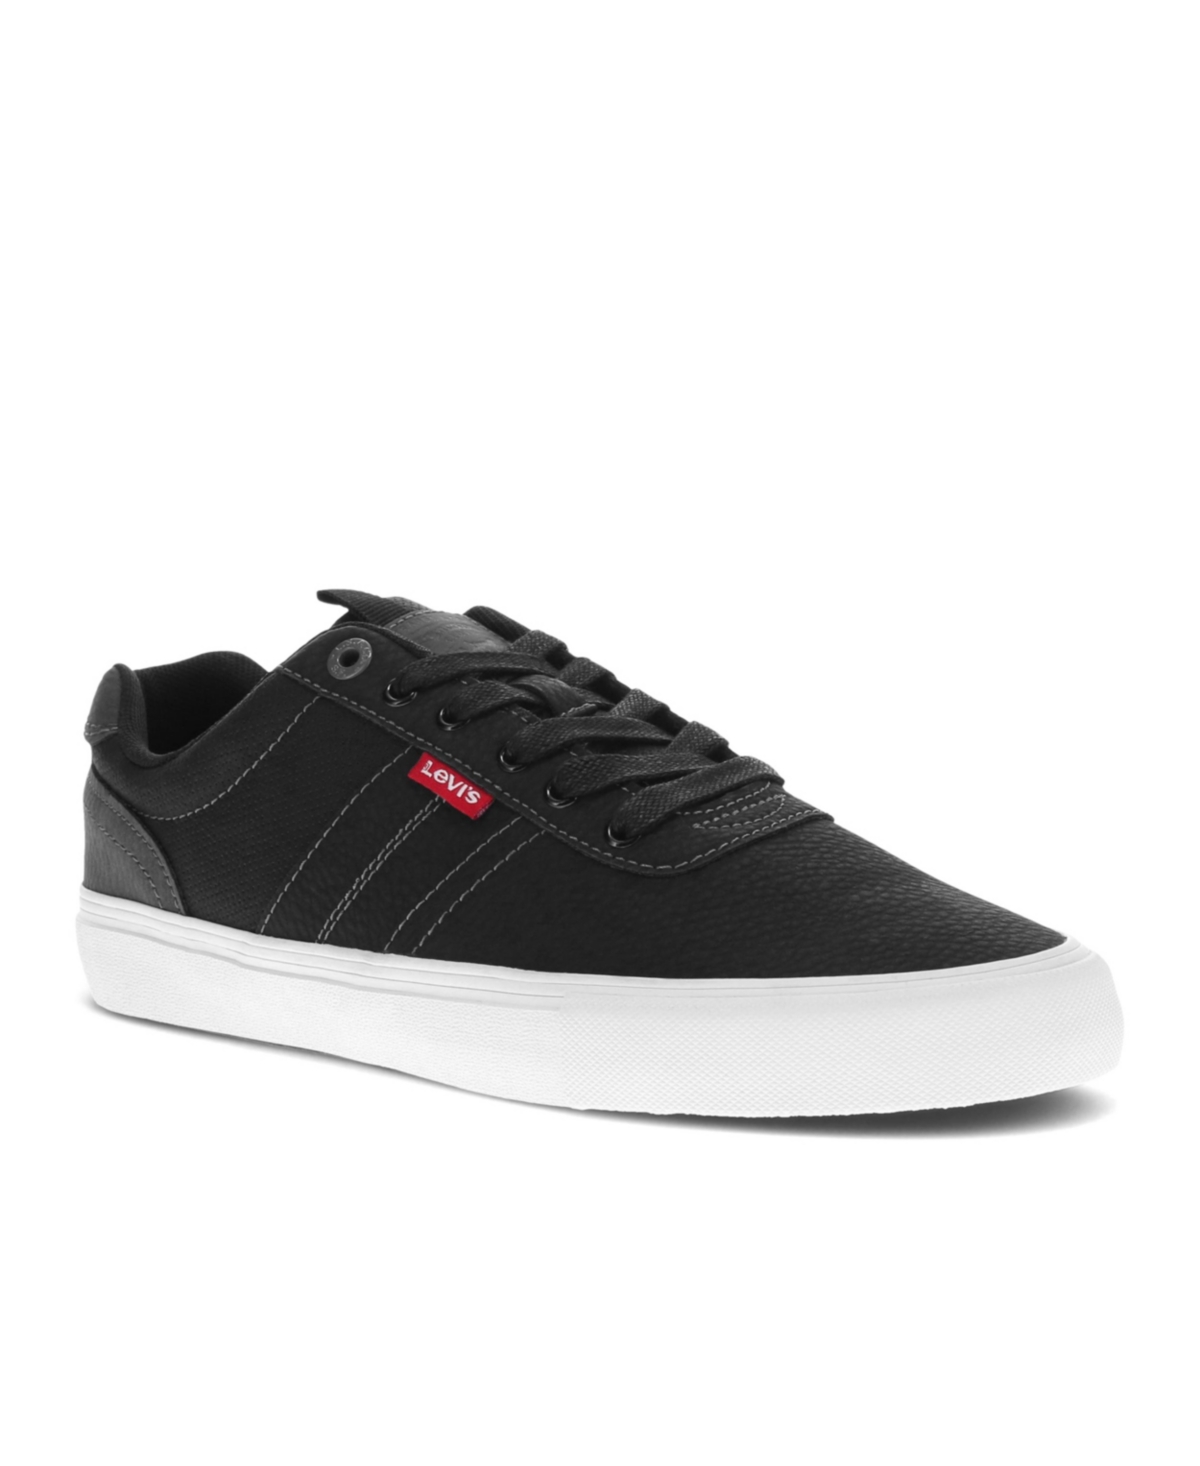 Levi's Men's Miles Wx Stacked Sneakers Men's Shoes In Black/charcoal